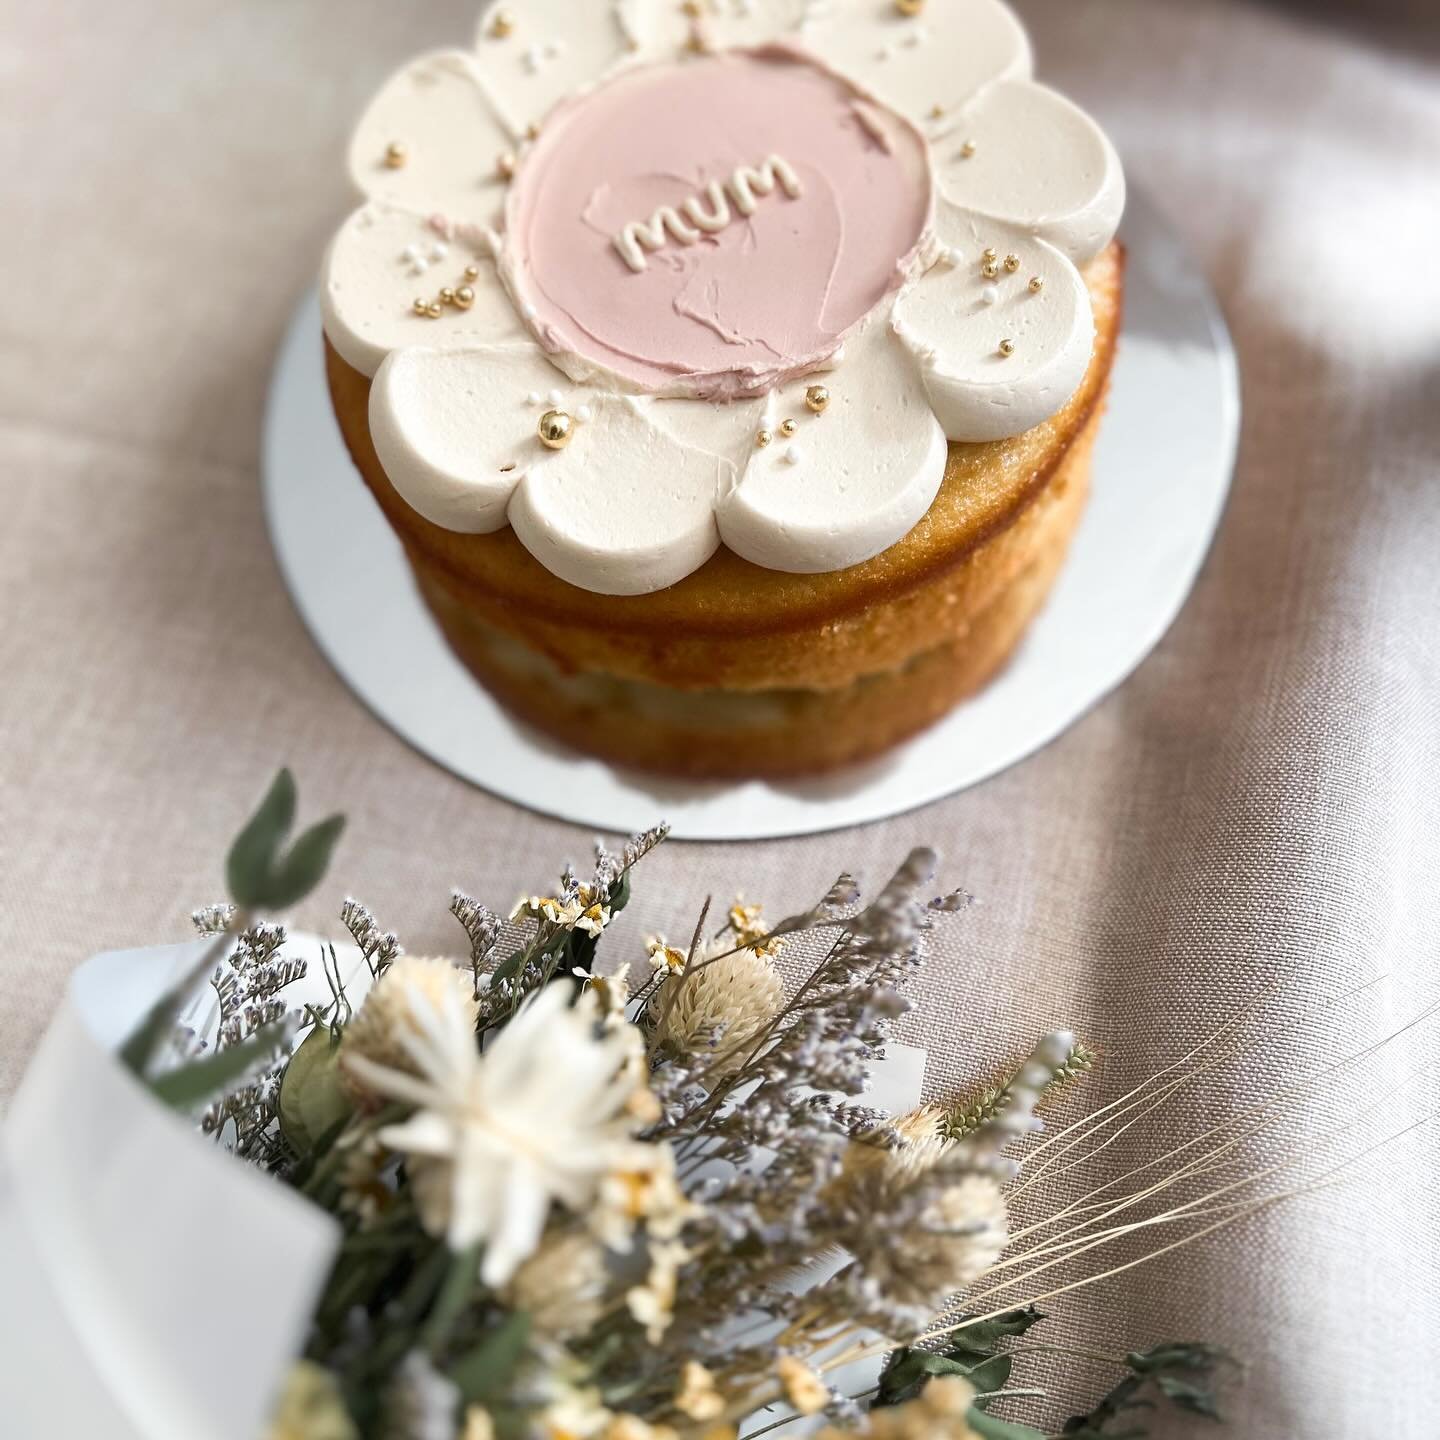 MOTHER&rsquo;S DAY - May 12th
Treat your mum to cake and flowers this Mother&rsquo;s Day 🌸

Single and double layer daisy cakes ($30/$55) available PLUS add a mini dried flower bunch from @decosbyd (+$15) to go with it 😍

Details and order form all